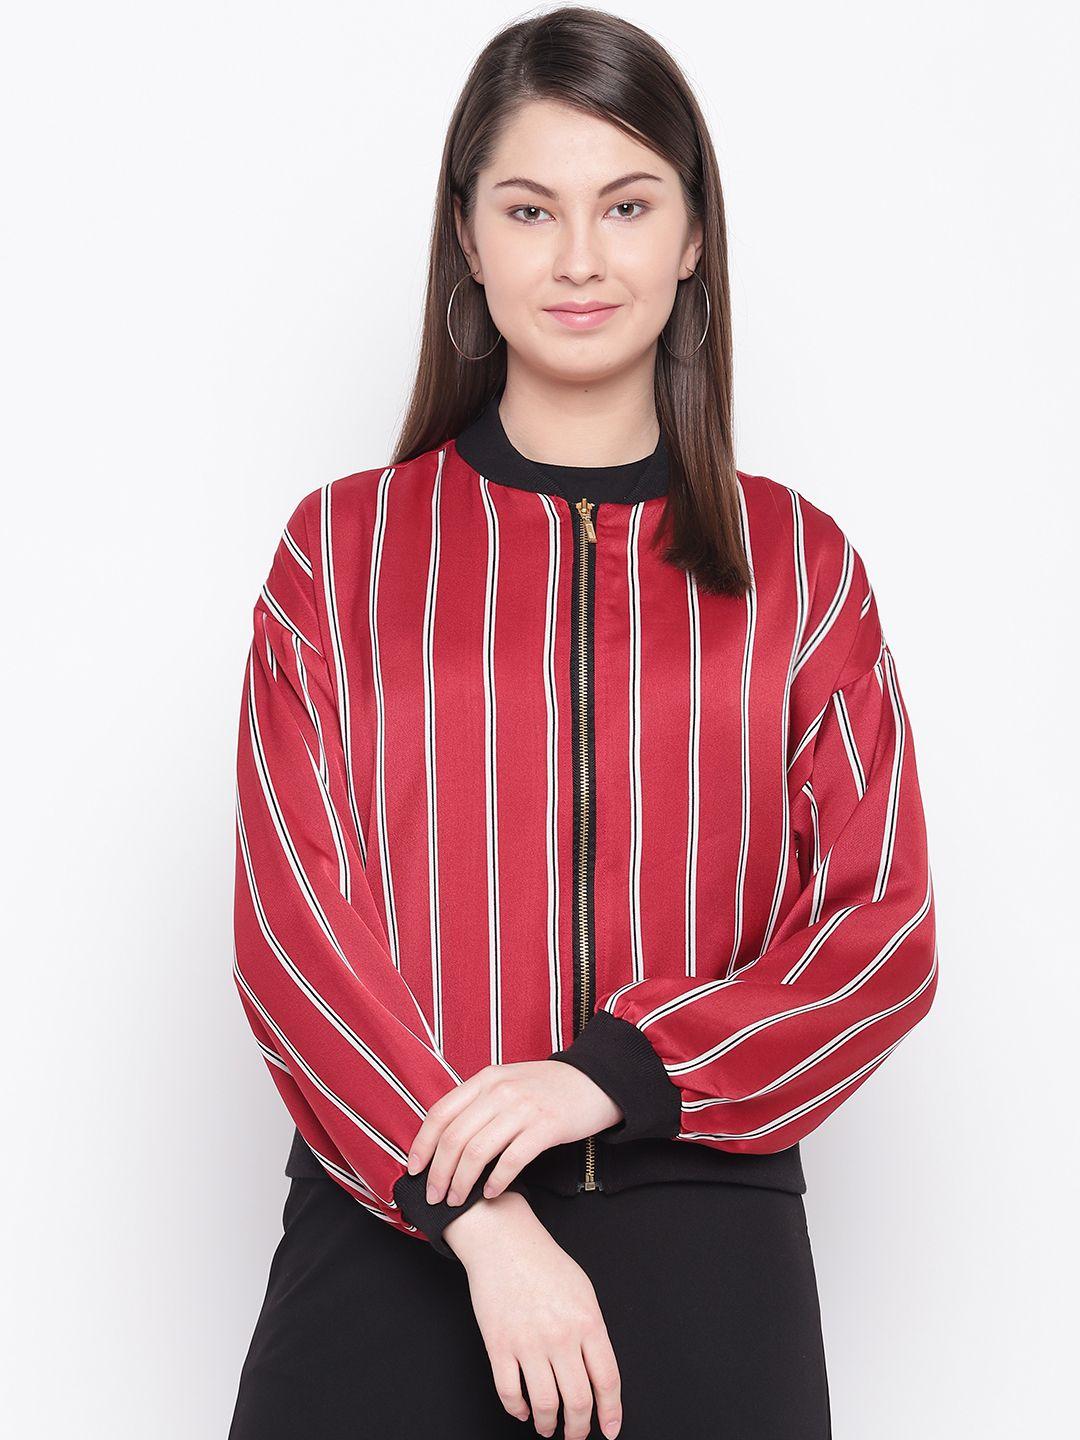 marie claire women red & white striped bomber jacket